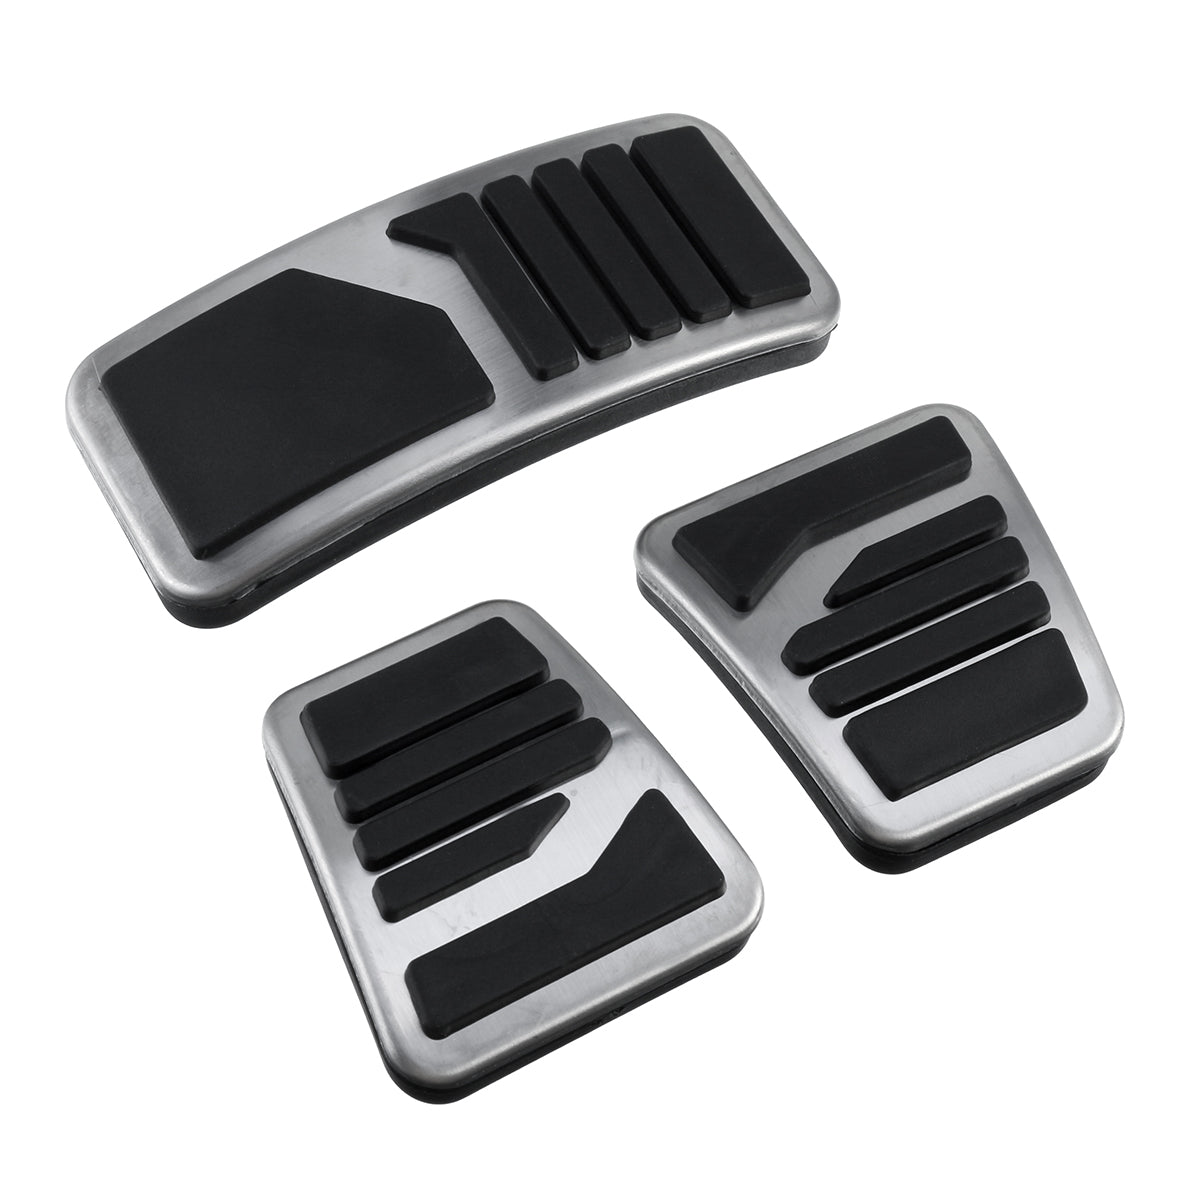 Black 3Pcs Manual MT Clutch Brake Pedals Stainless Steel Metal Accelerator Universal For Mitsubishi